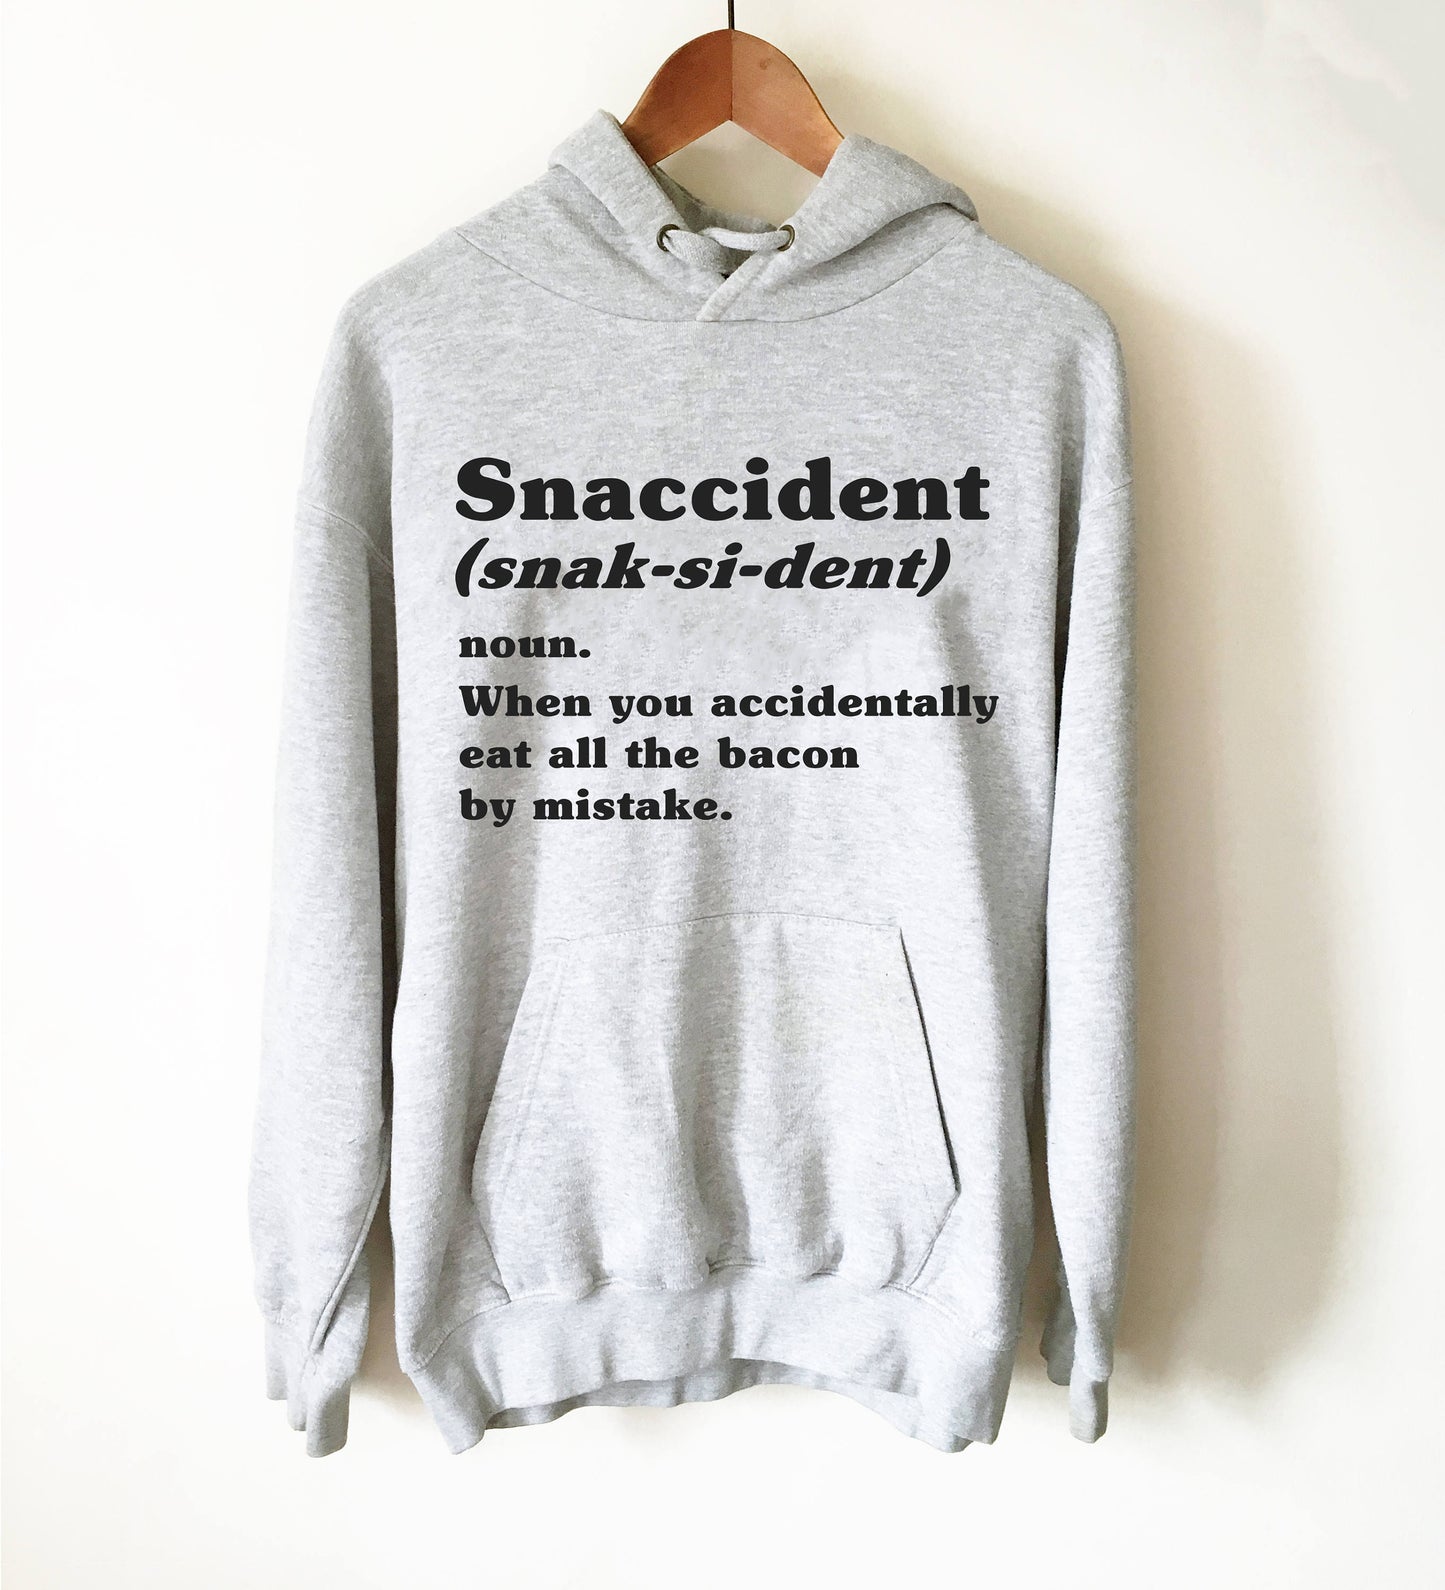 Snaccident Definition Hoodie - Bacon shirt | Food shirt | Foodie gift | Foodie shirt | Junk food shirt